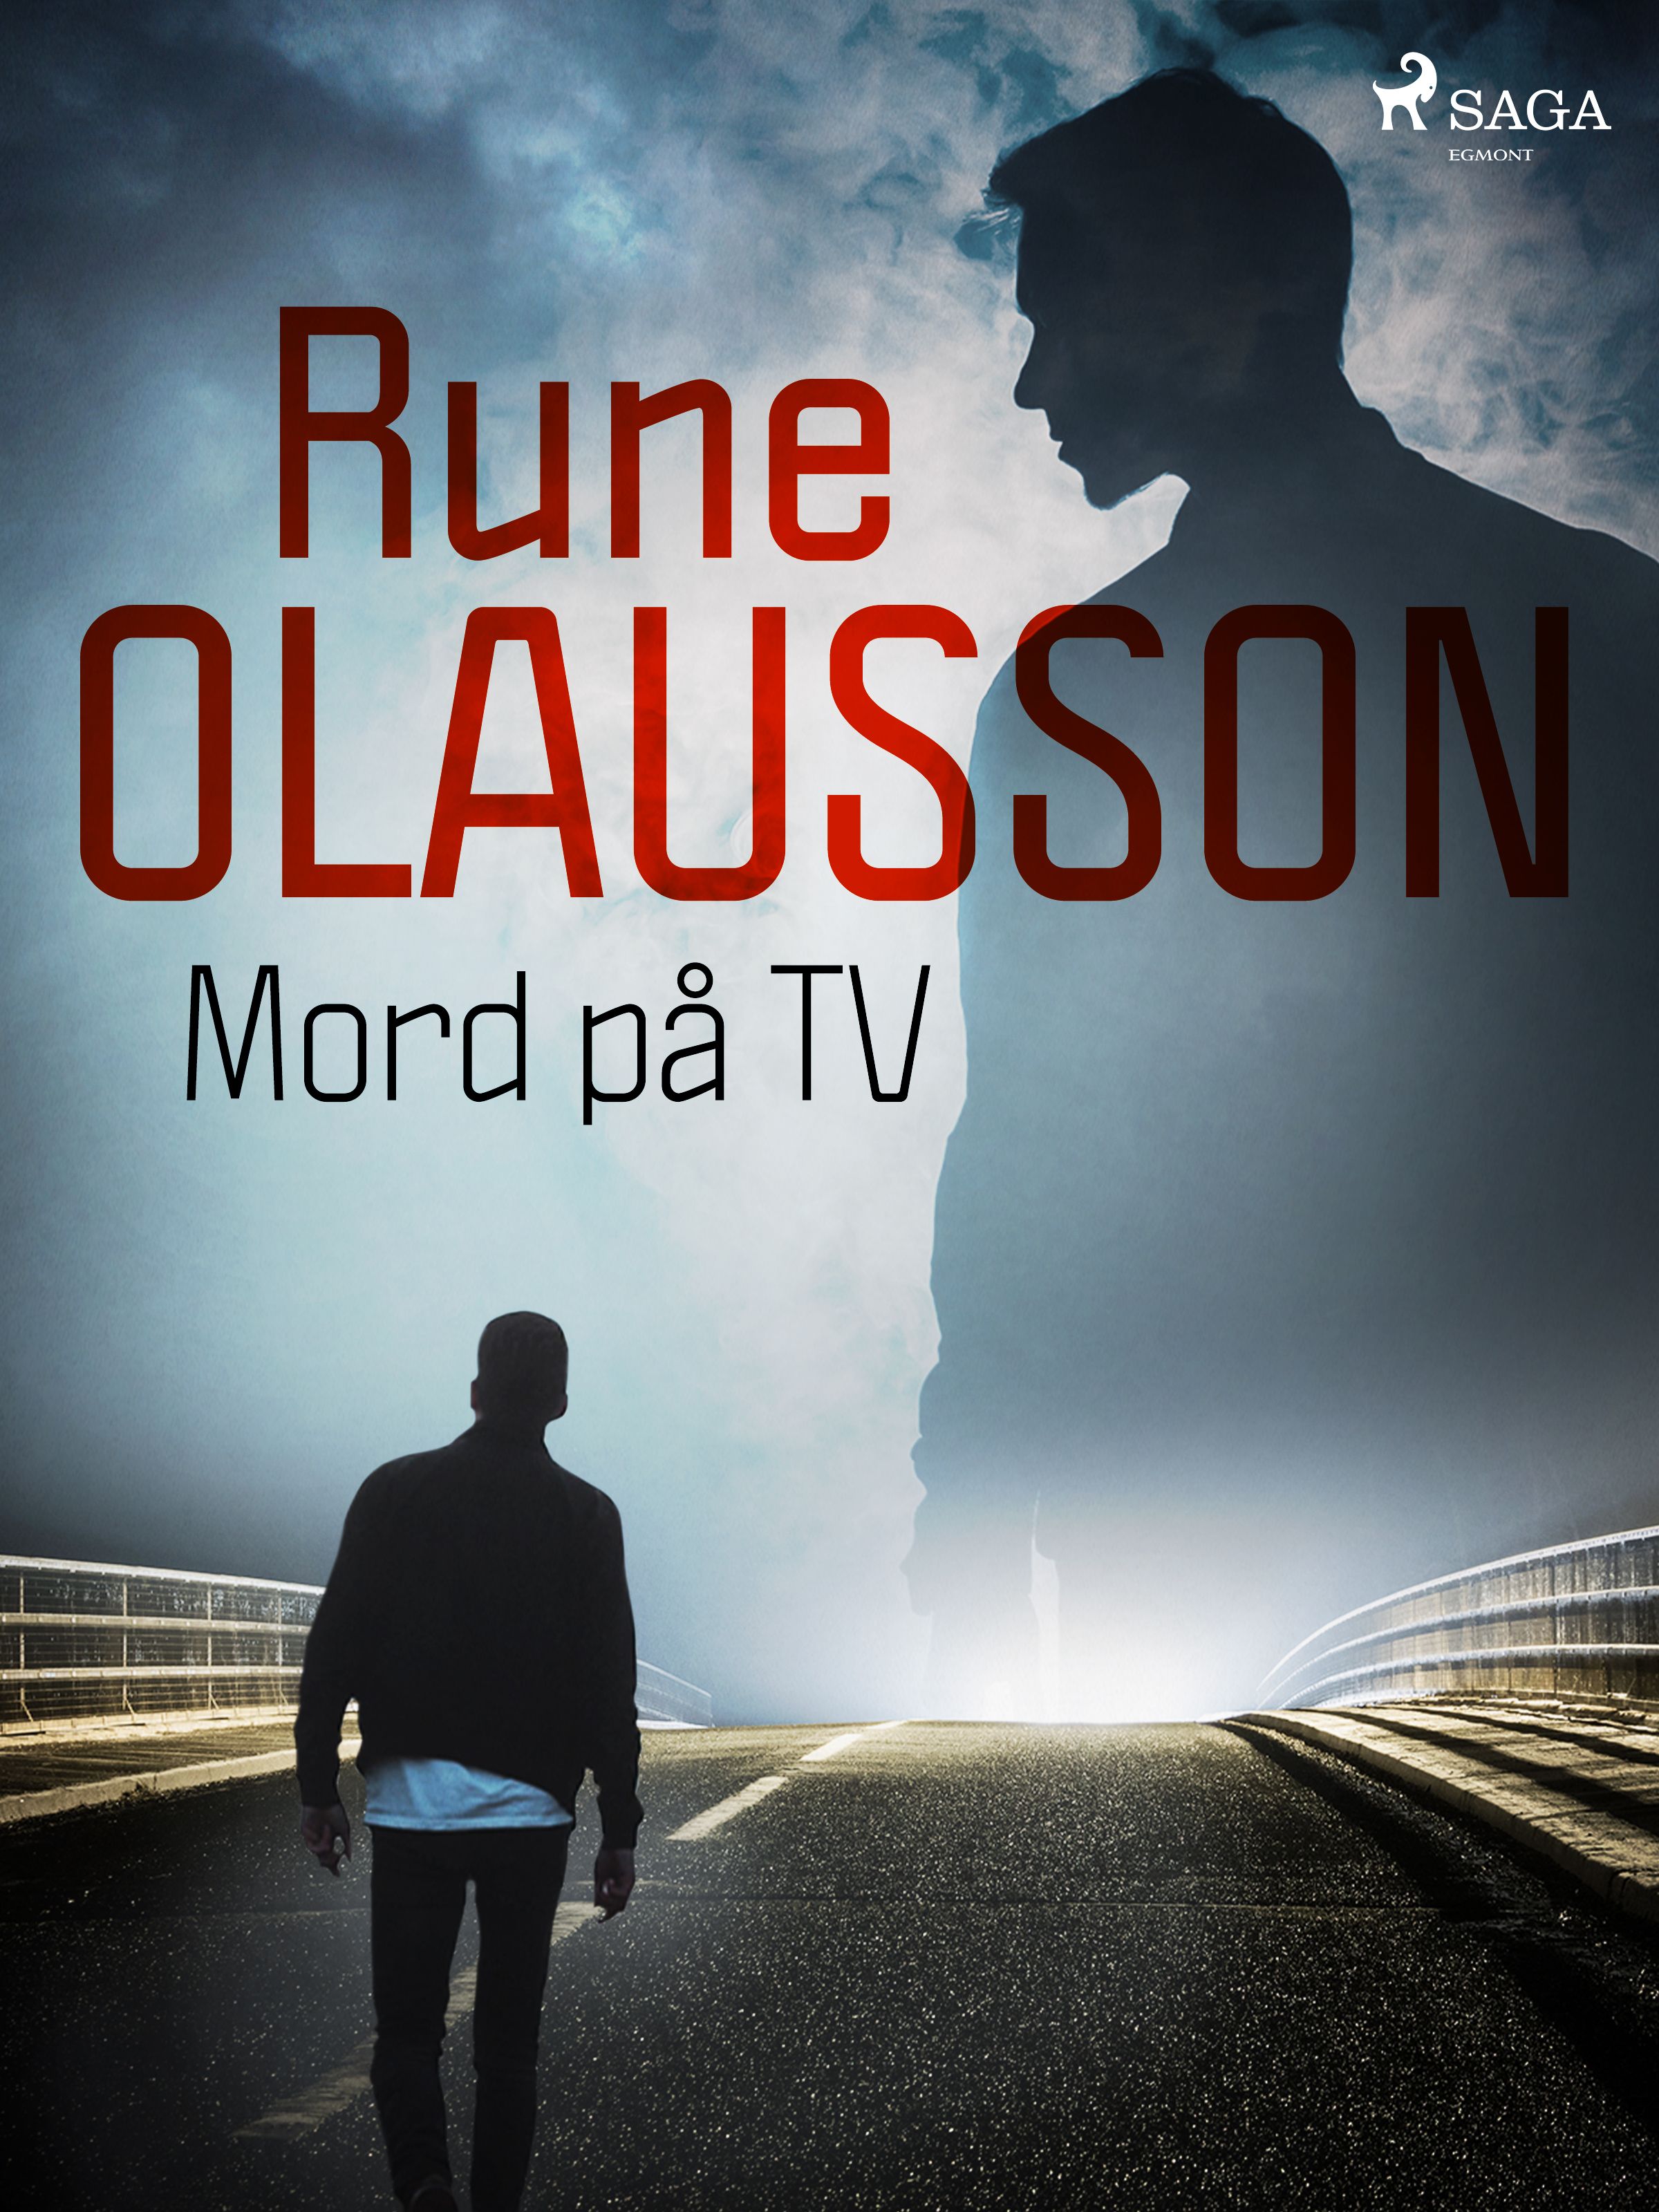 Mord på TV, eBook by Rune Olausson